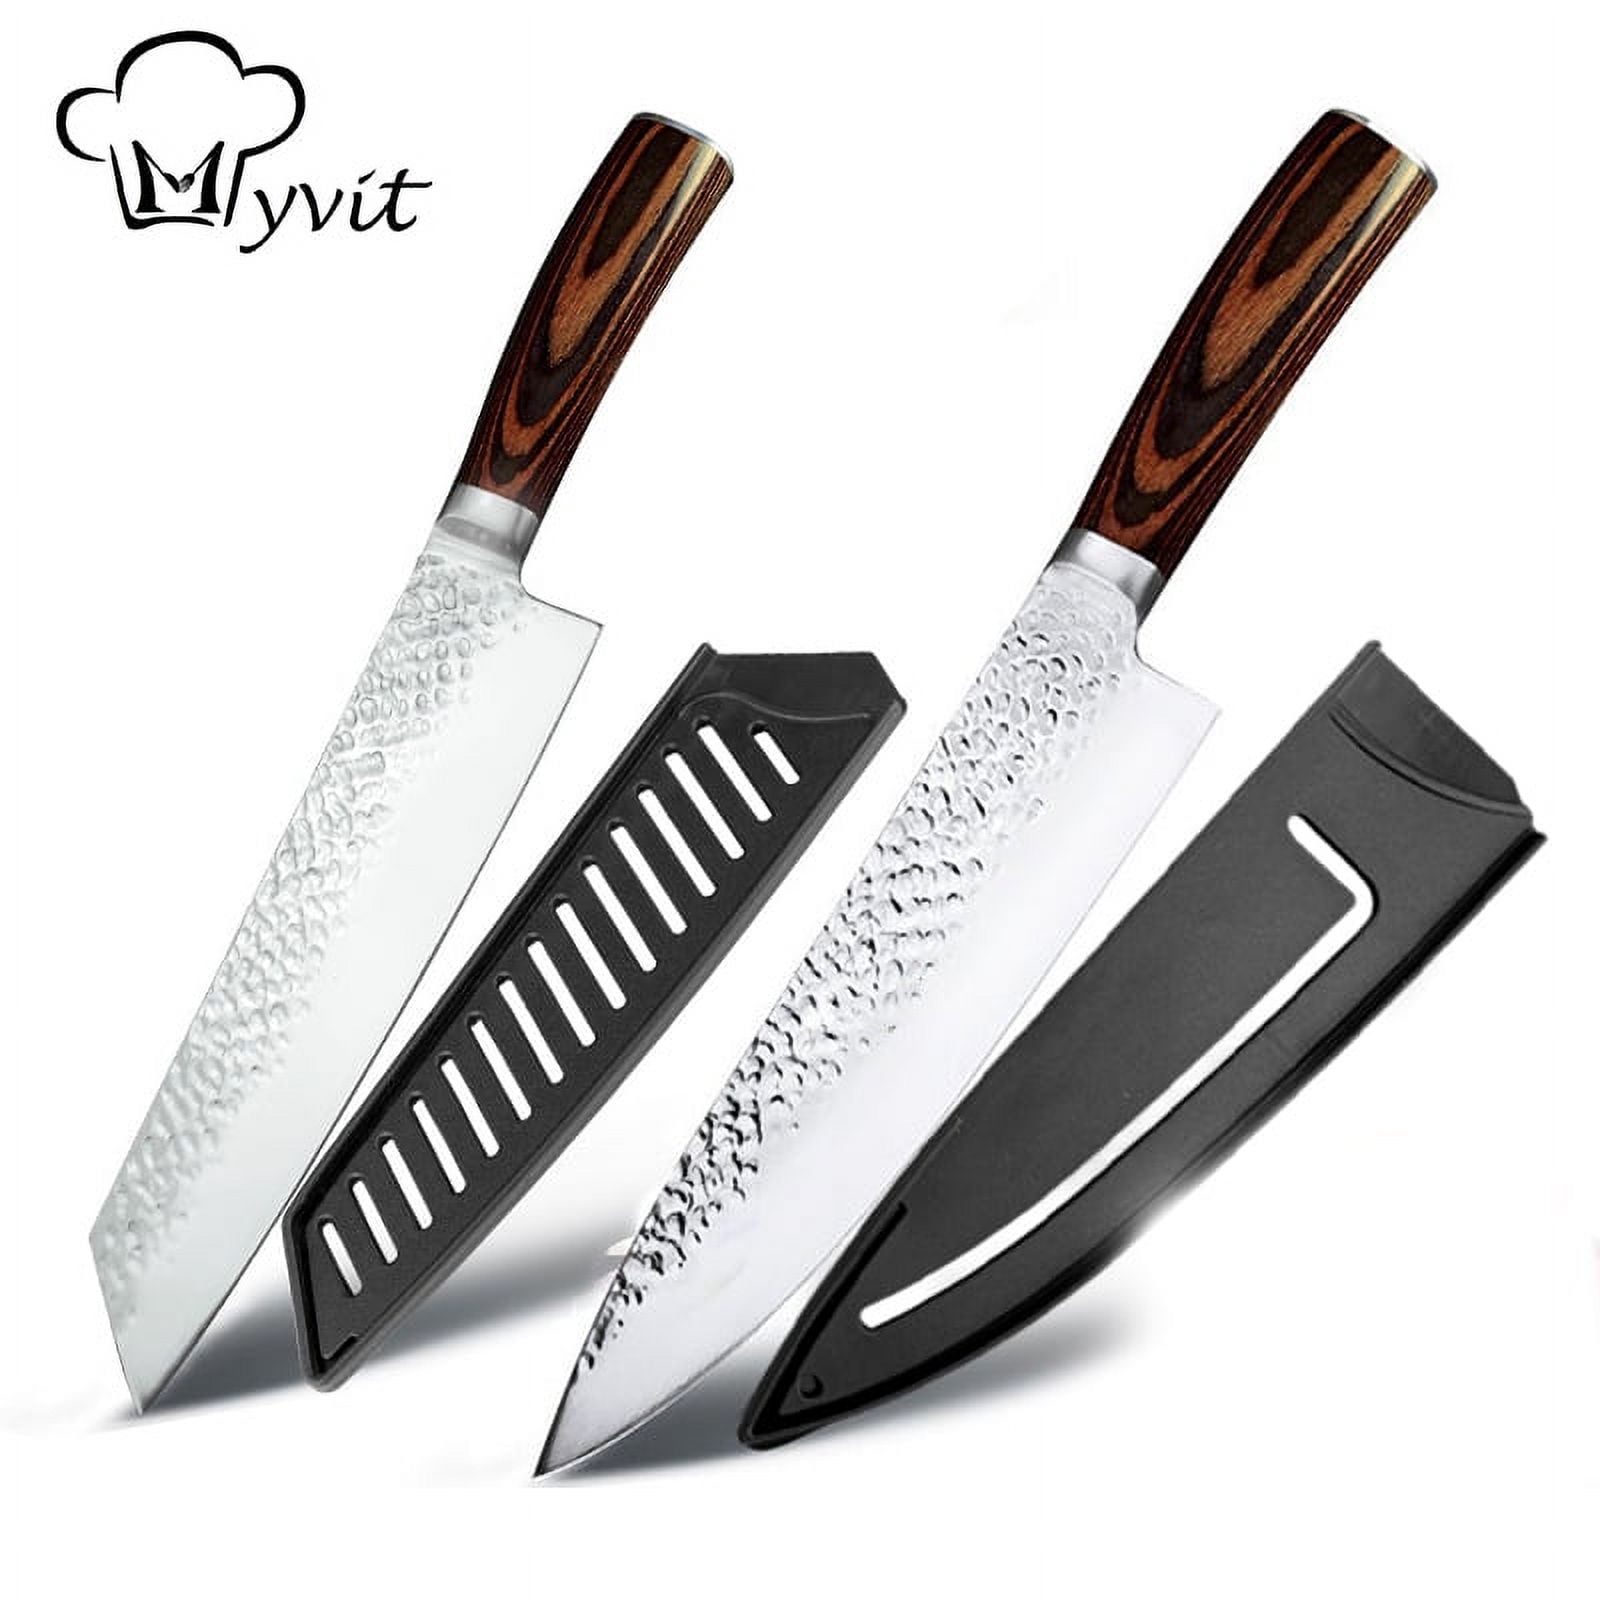 AOKEDA 7-Piece Kitchen Knife Set with Block, High Carbon German Steel, with  Kitchen Shears (Natural Wenge)